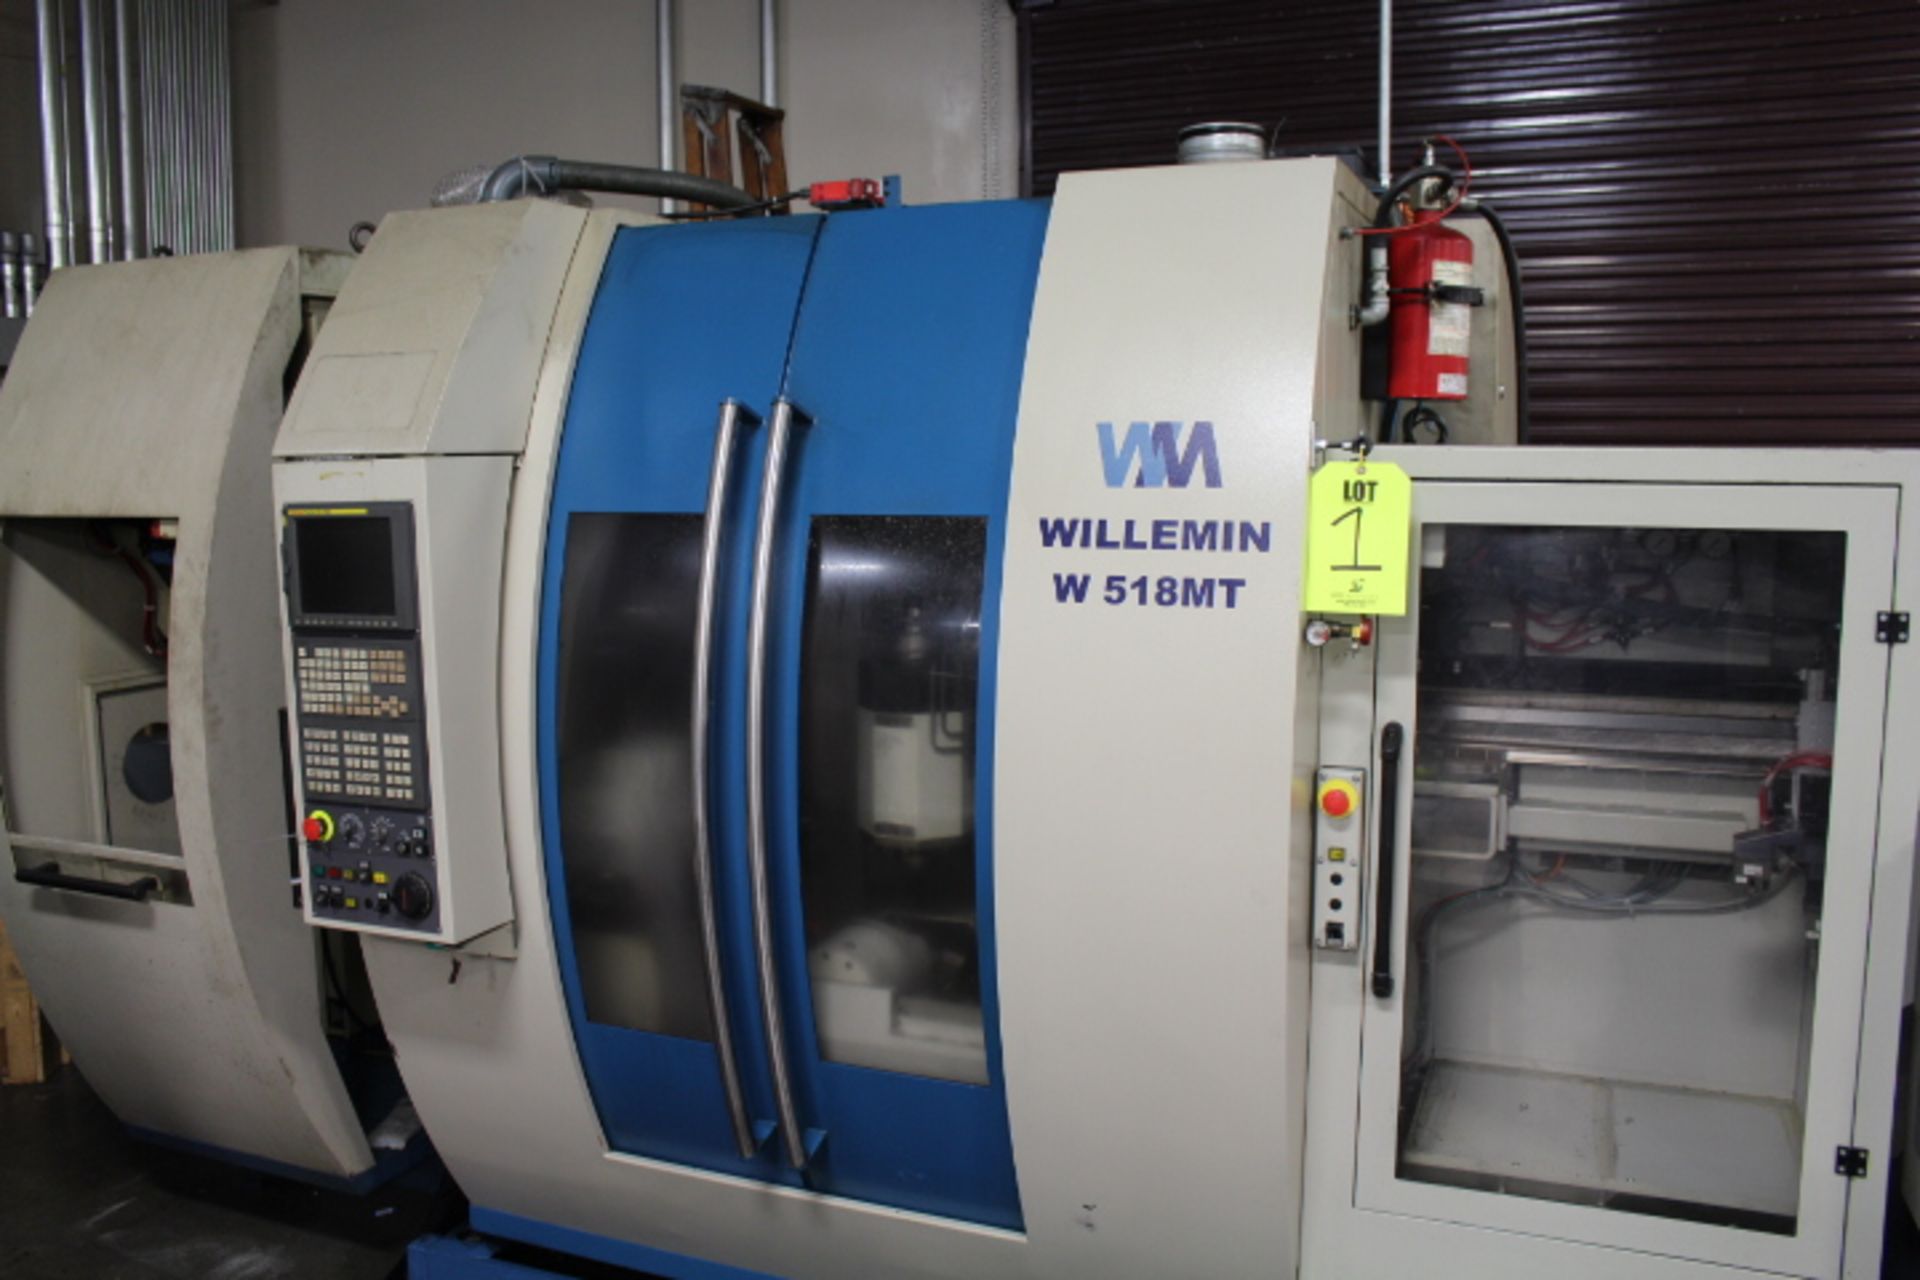 2007 WILLEMIN CNC MILL/TURNING LATHE, MODEL 518MT 7-AXIS, GE SERIES FANUC 16i-MB CNC CONTROL, 72 ATC - Image 2 of 38